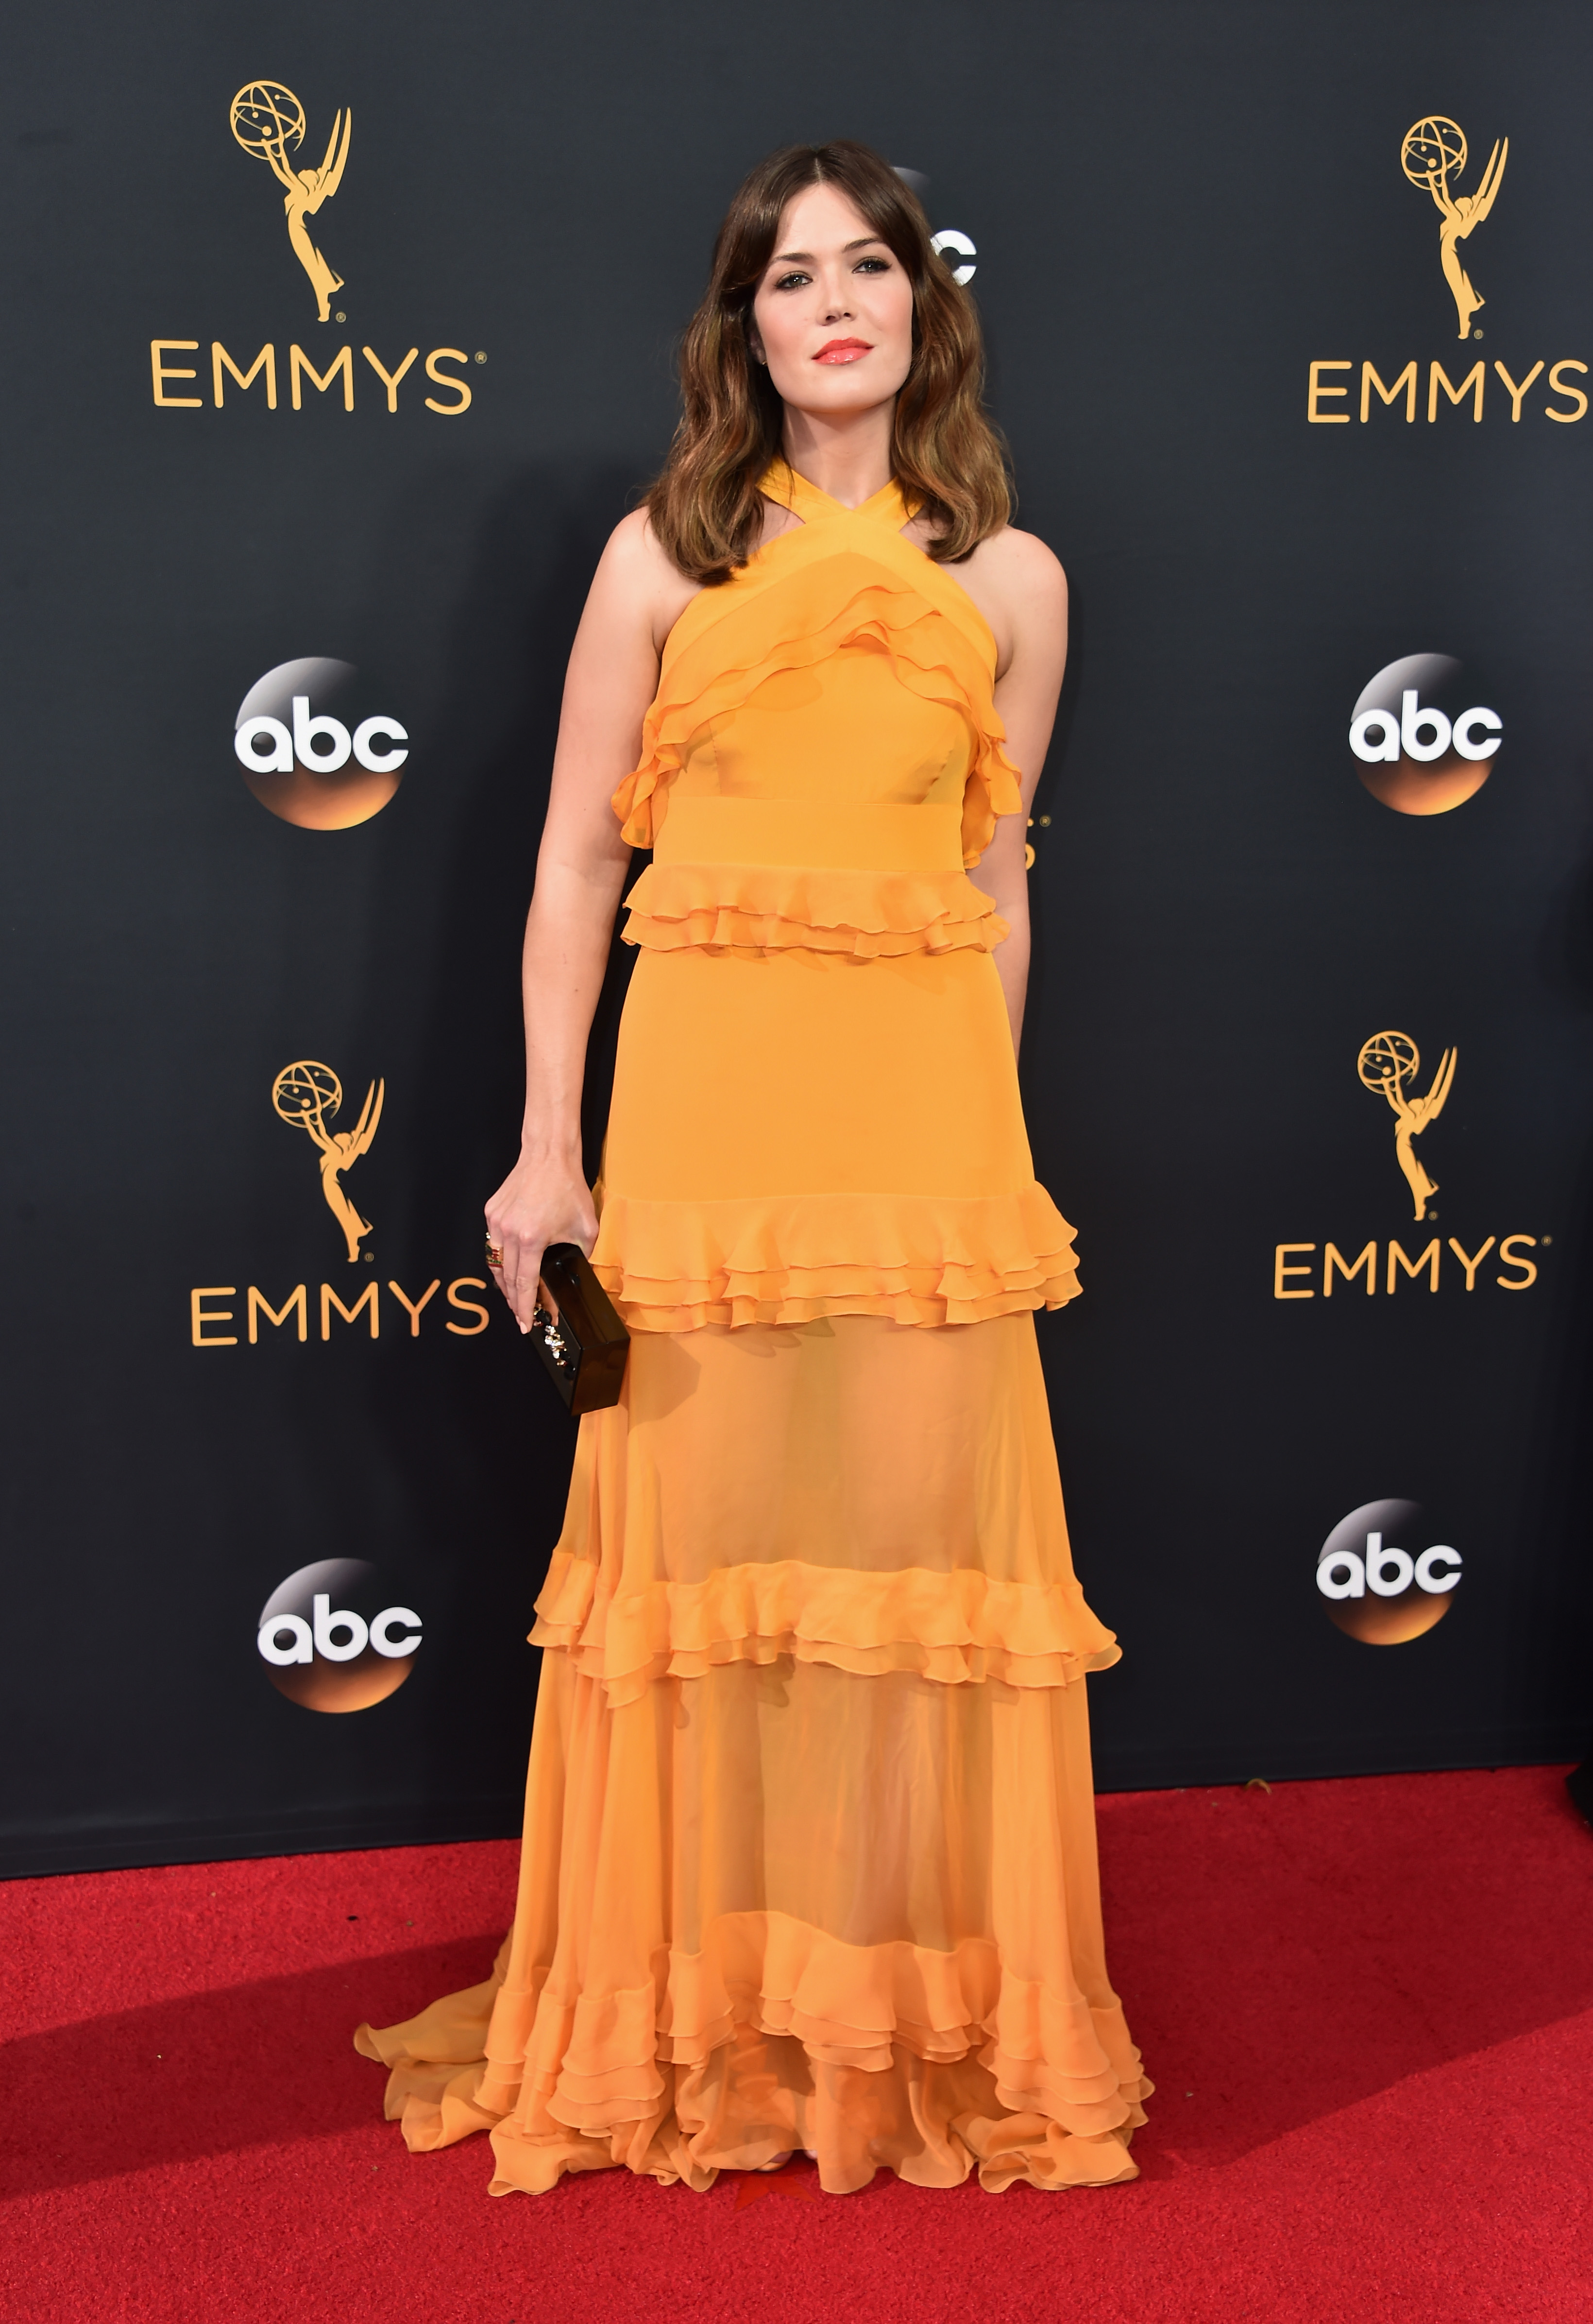 Merle Ginsberg Weighs in on the Emmys' Red Carpet Fashion - Daily Front Row